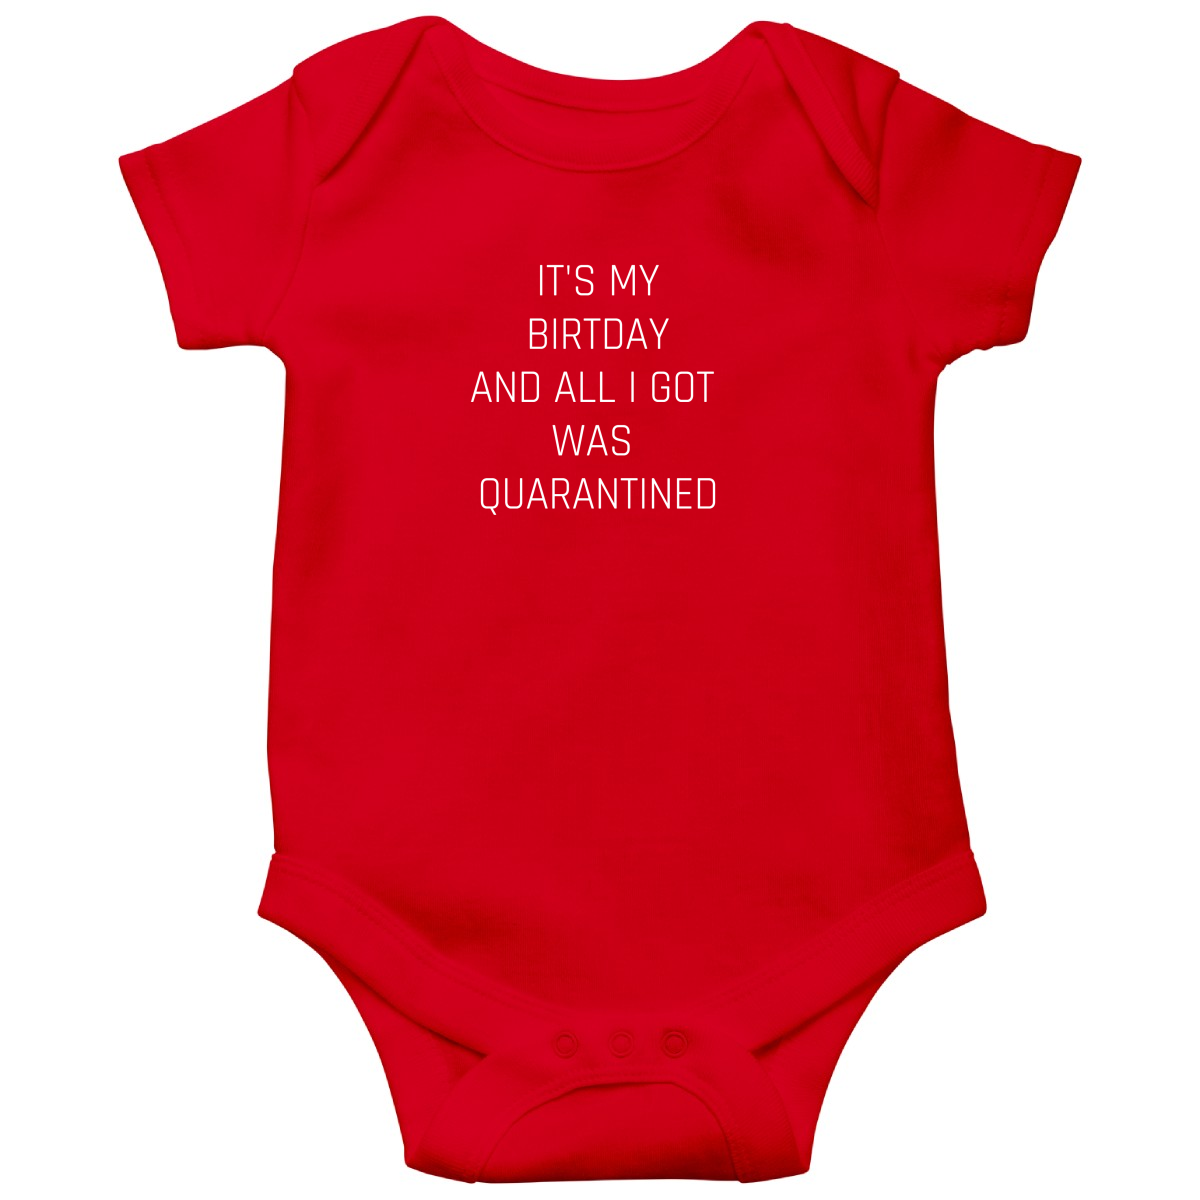 IT'S MY BIRTDAY  Baby Bodysuits | Red